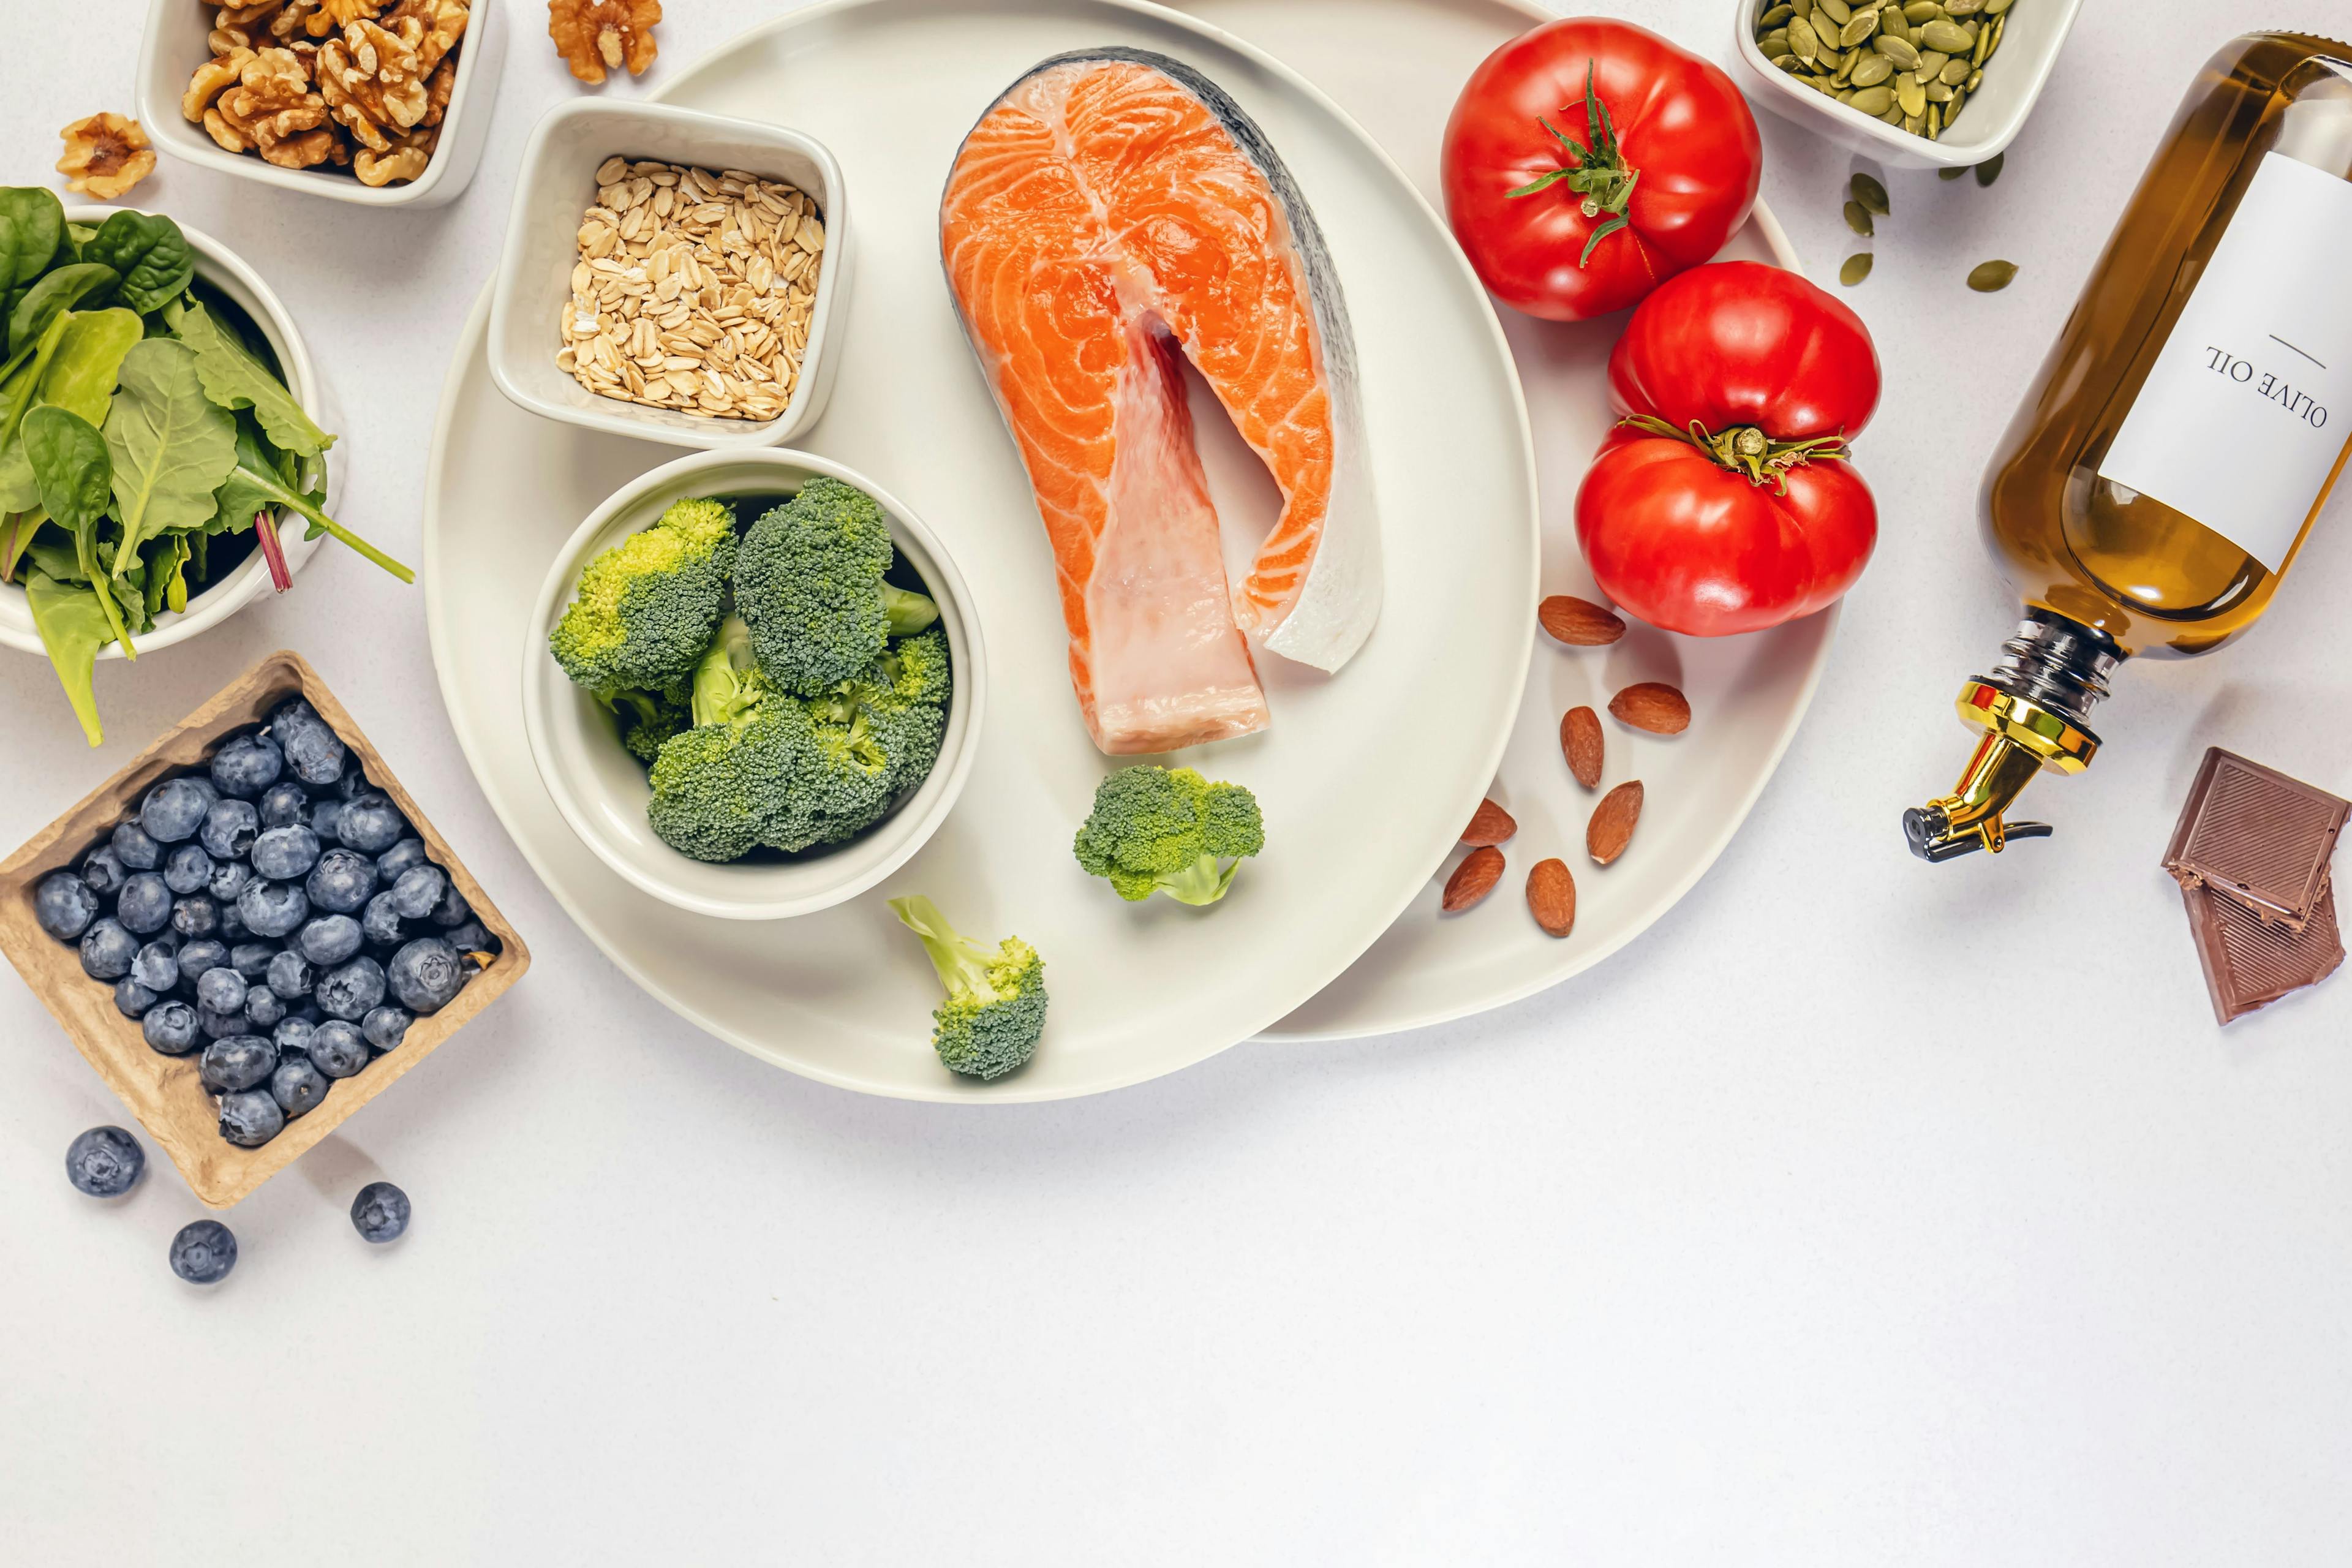 Currently, there is no consensus on the best diet for managing MS | image credit: Diana Vyshiakova - stock.adobe.com